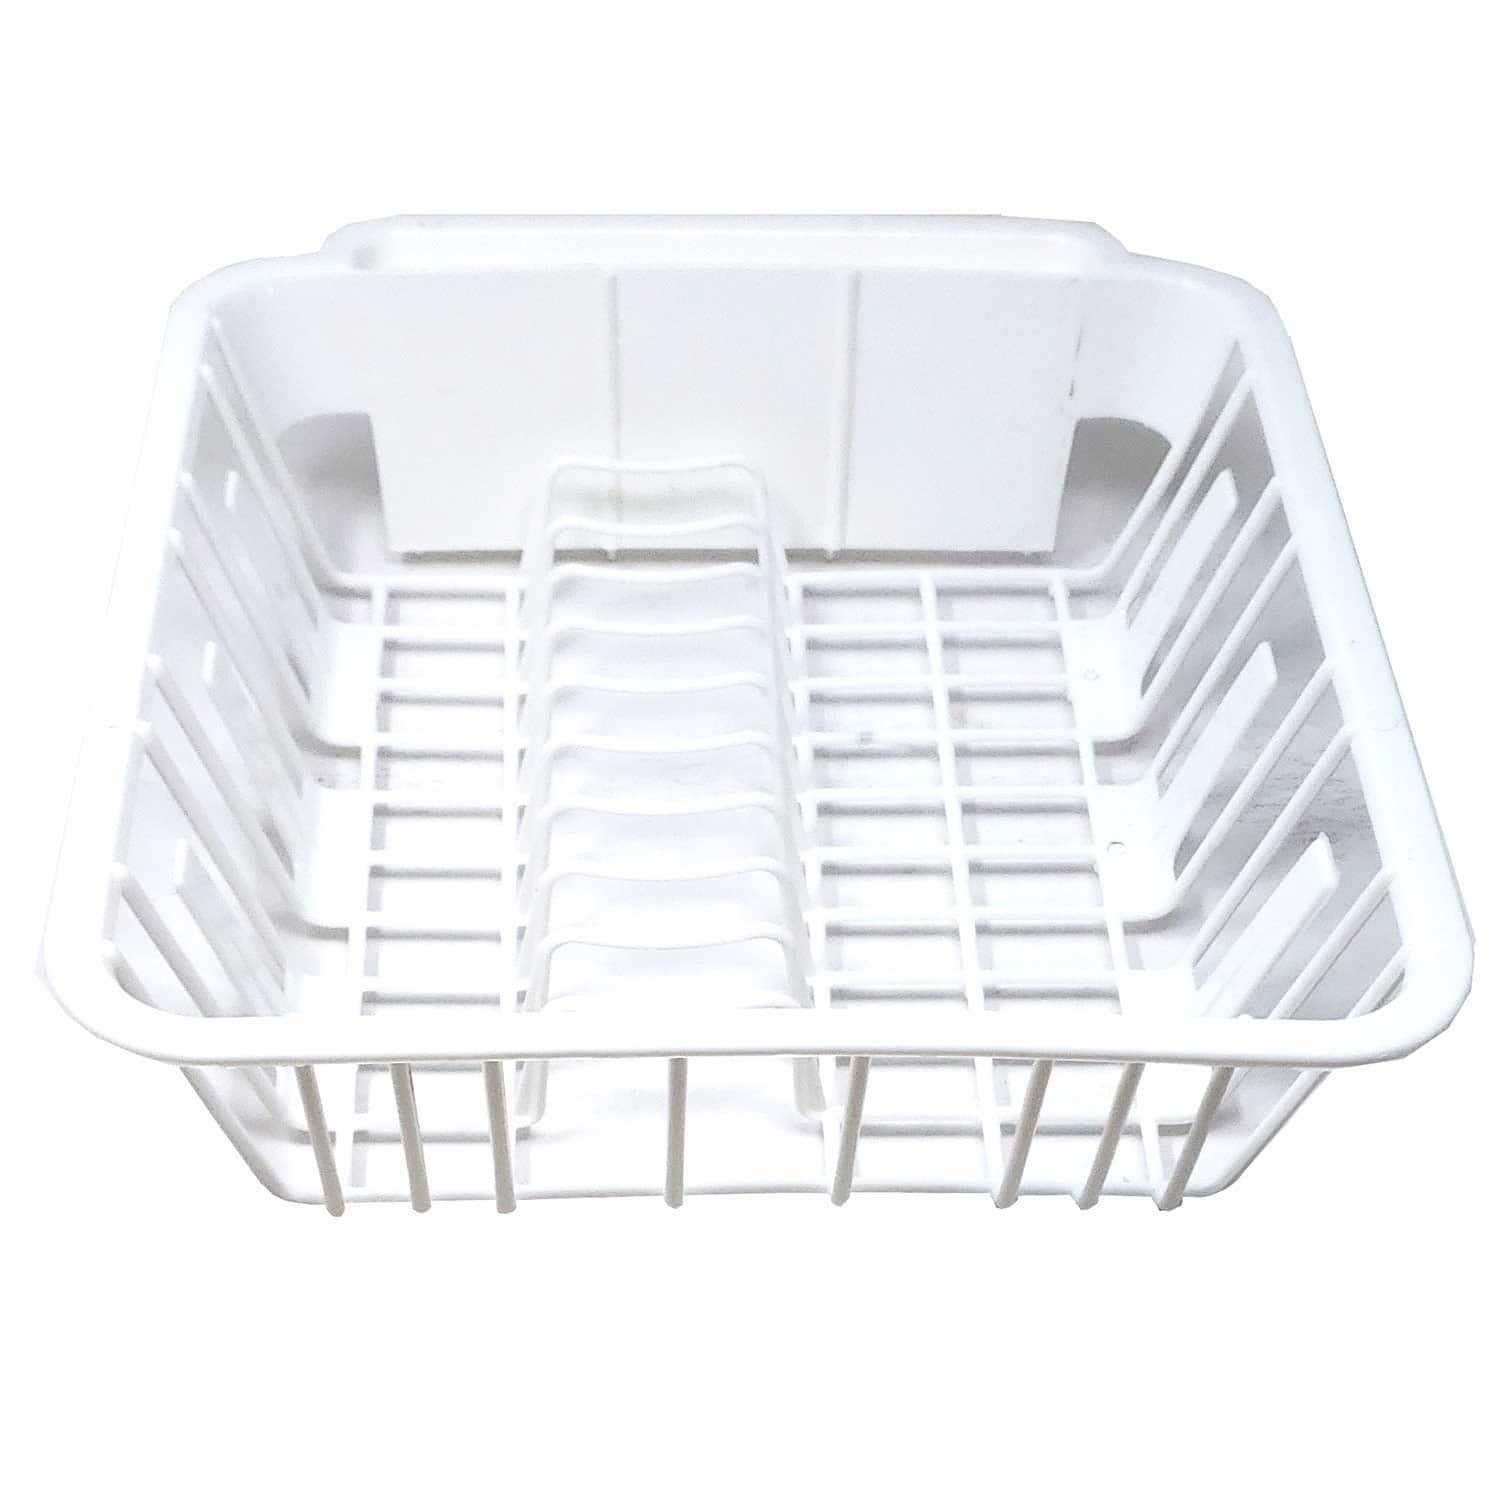 https://ak1.ostkcdn.com/images/products/27104118/BPA-Free-Small-Dish-Drainer-Kitchen-Sink-Drying-Rack-With-Cup-Spoon-Holders-a9d101d3-02e9-40eb-8ef6-c237a0ff5e6a.jpg